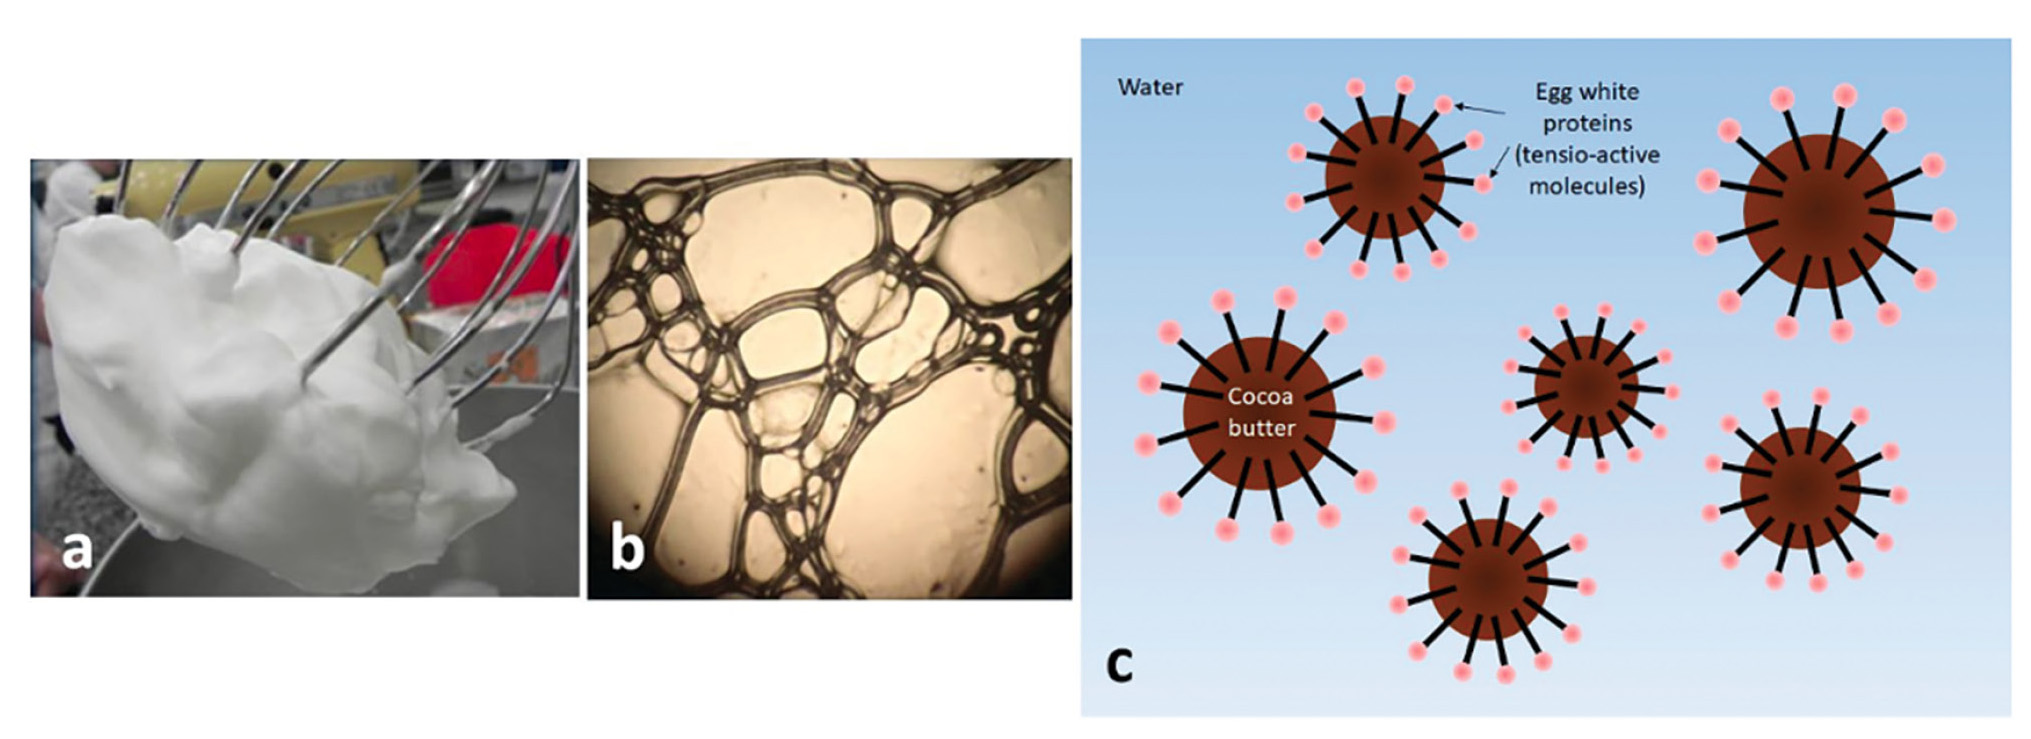 Photograph of beaten egg white with the naked eye (a) and under an optical microscope (b). Scheme of the resulting emulsion when cocoa butter crystallizes inside the air bubbles (c).